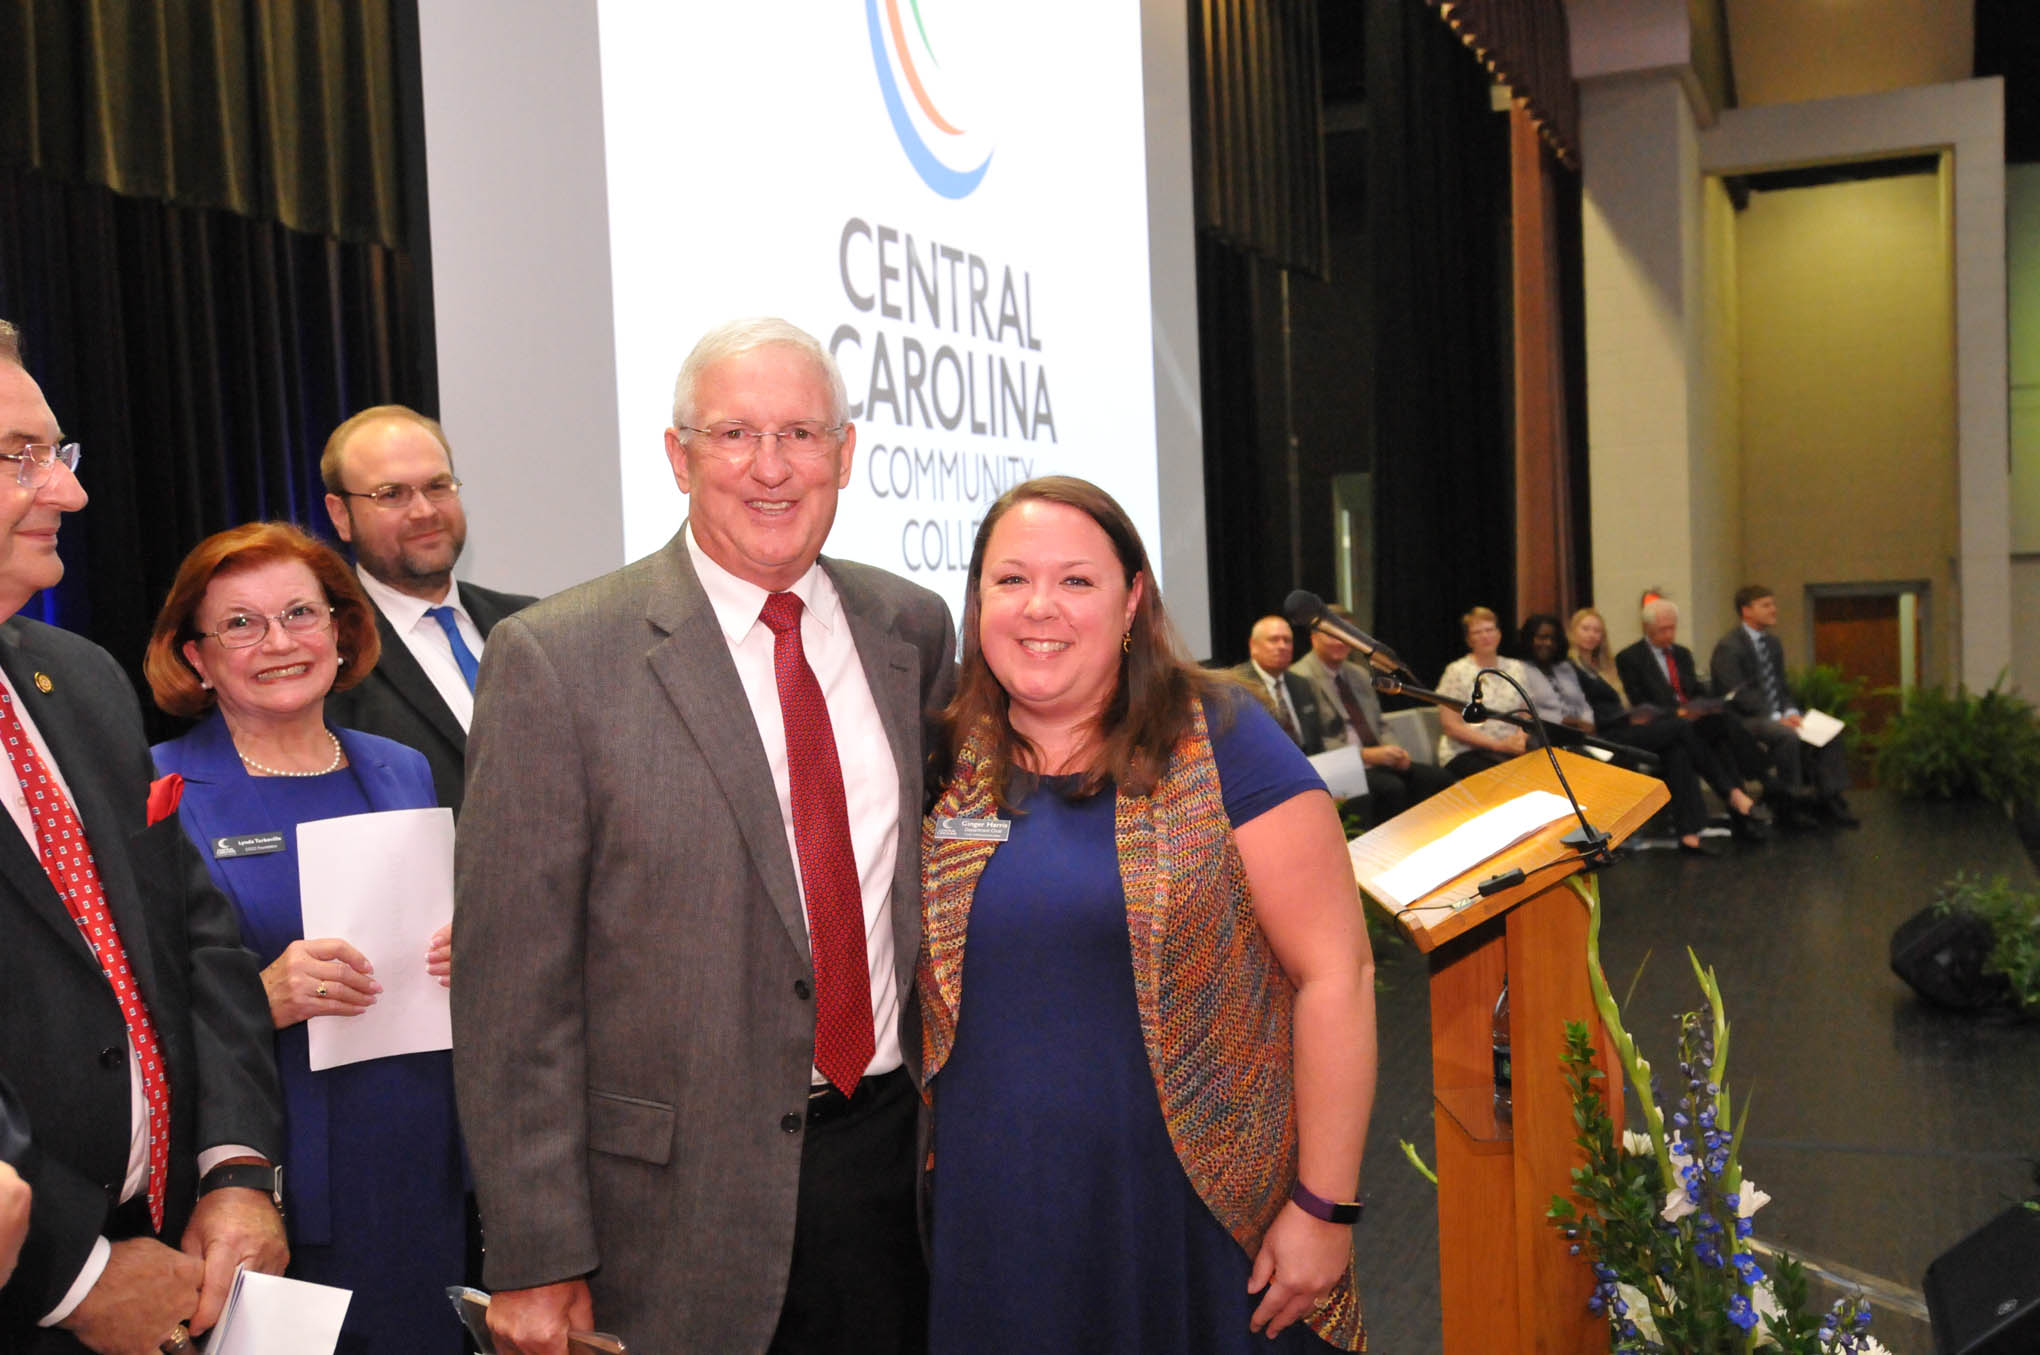 Read the full story, CCCC announces awards during Convocation event